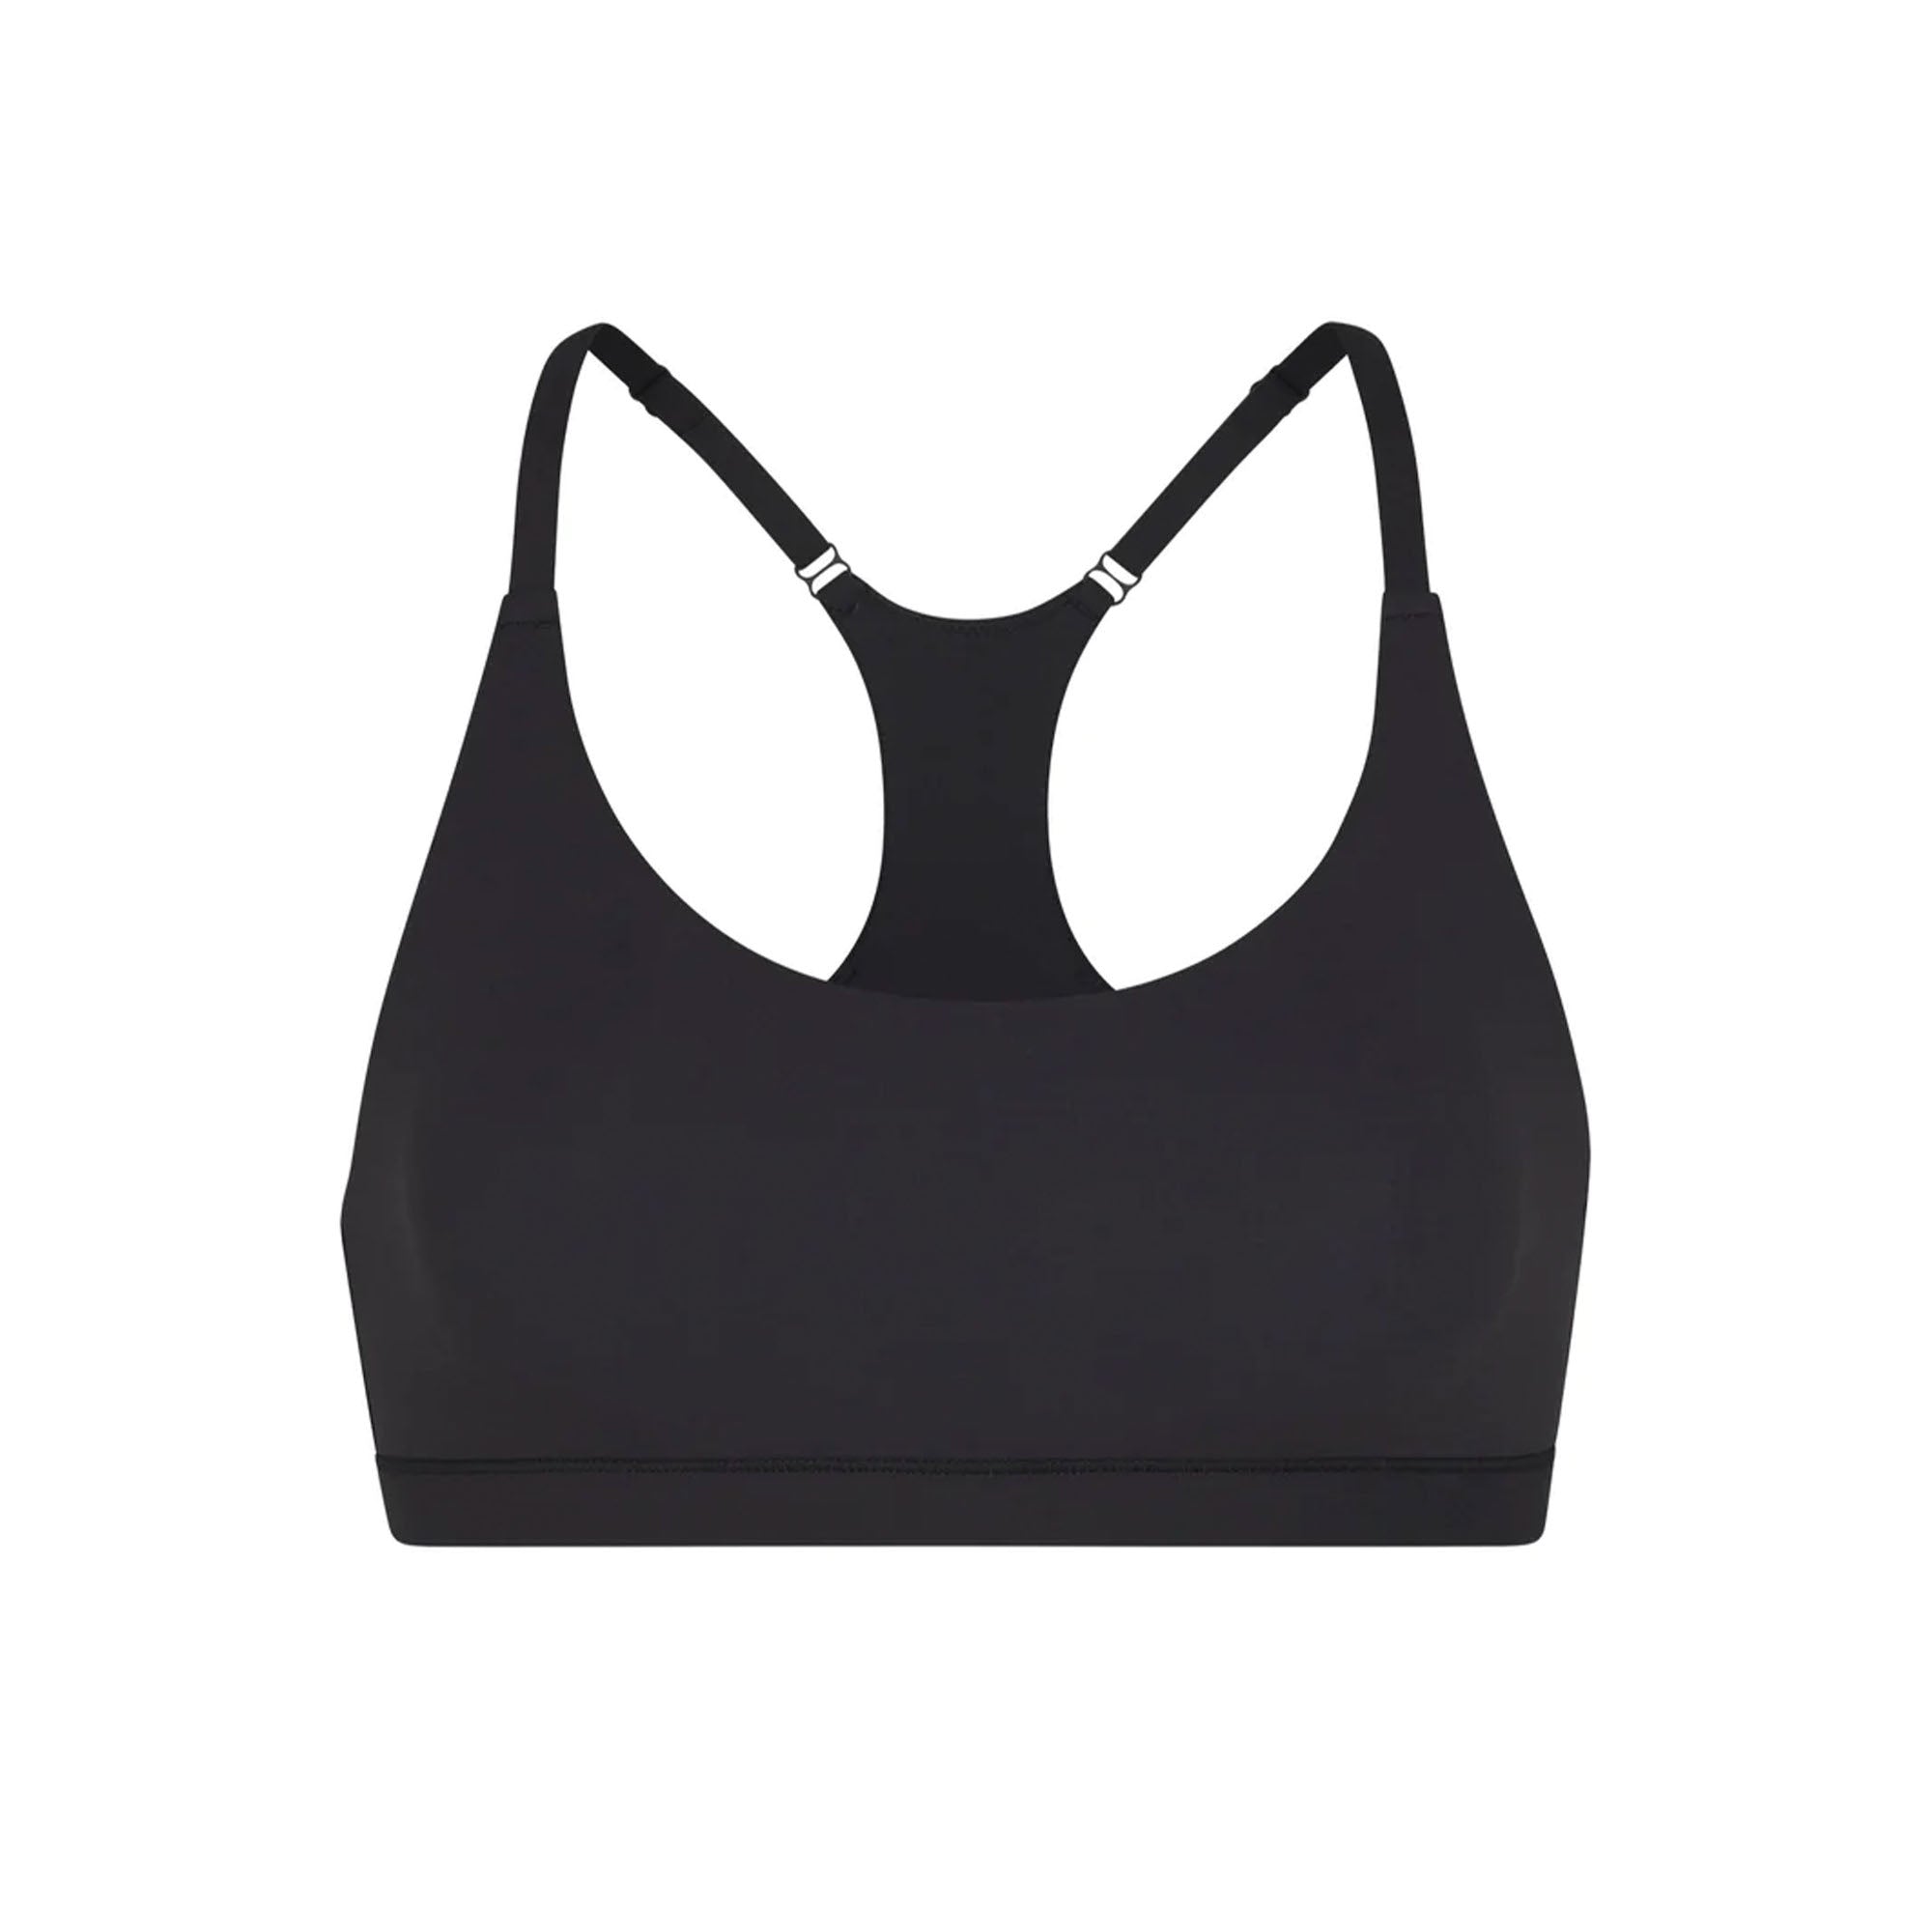 Molke - Our brand new Racerback Bralettes are now LIVE! Opt for